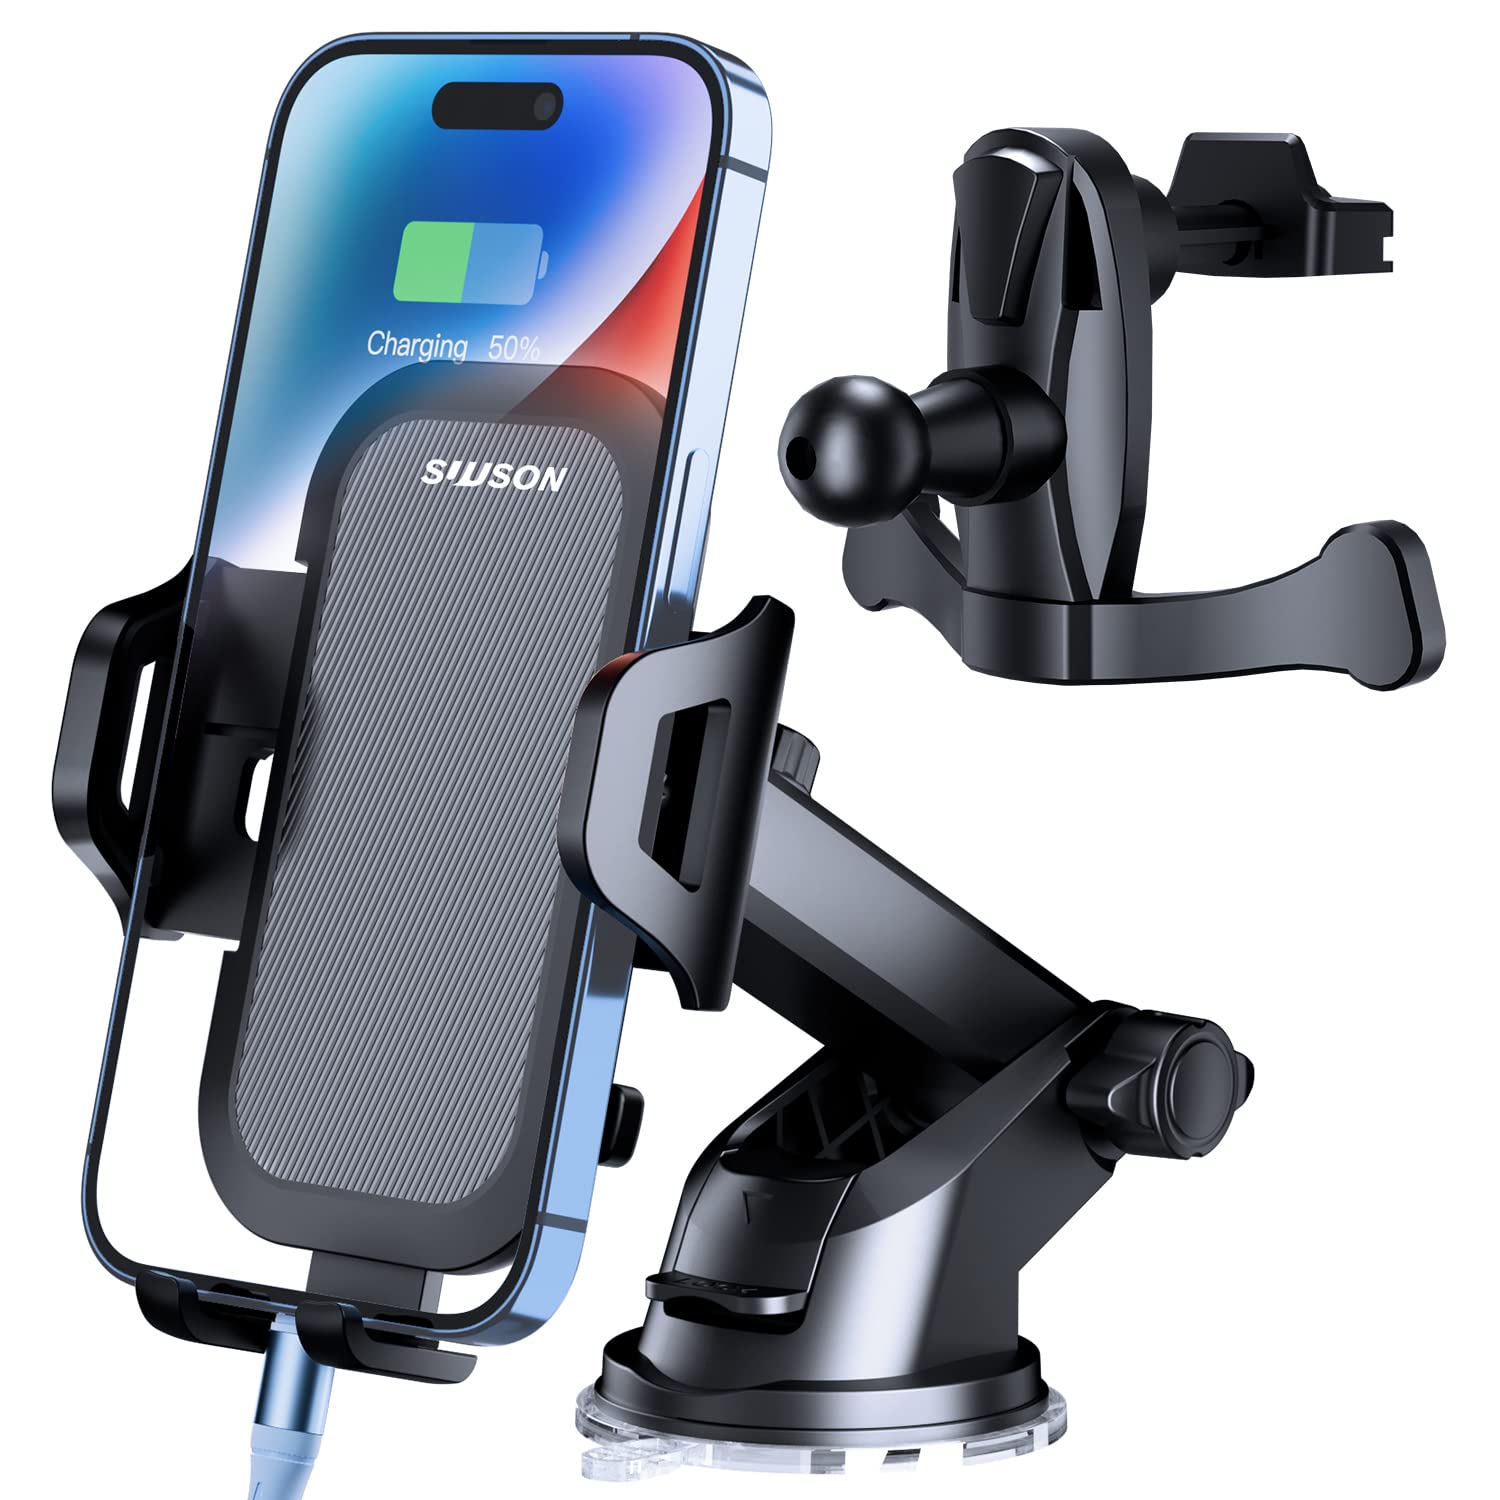 SUUSON Car Phone Holder Mount【Upgraded】-【Bumpy Roads Friendly】 Phone Mount for Car Dashboard Windshield Air Vent 3 in 1,Hand Free Mount for iPhone 14 13 12 Pro Max Samsung All Cell Phones (Gray)